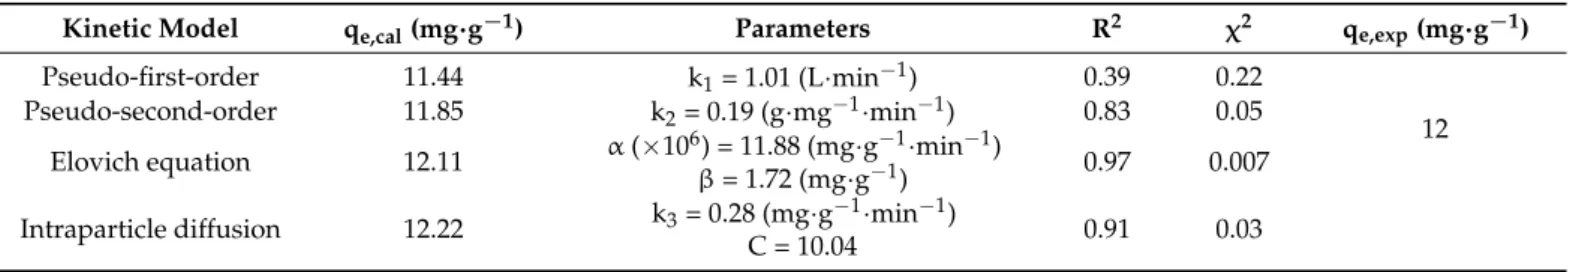 Table 6 gives the adsorption constant of each model as well as the calculated and experimental values of q e (q e,cal and q e,exp , respectively), R 2 , and χ 2 .